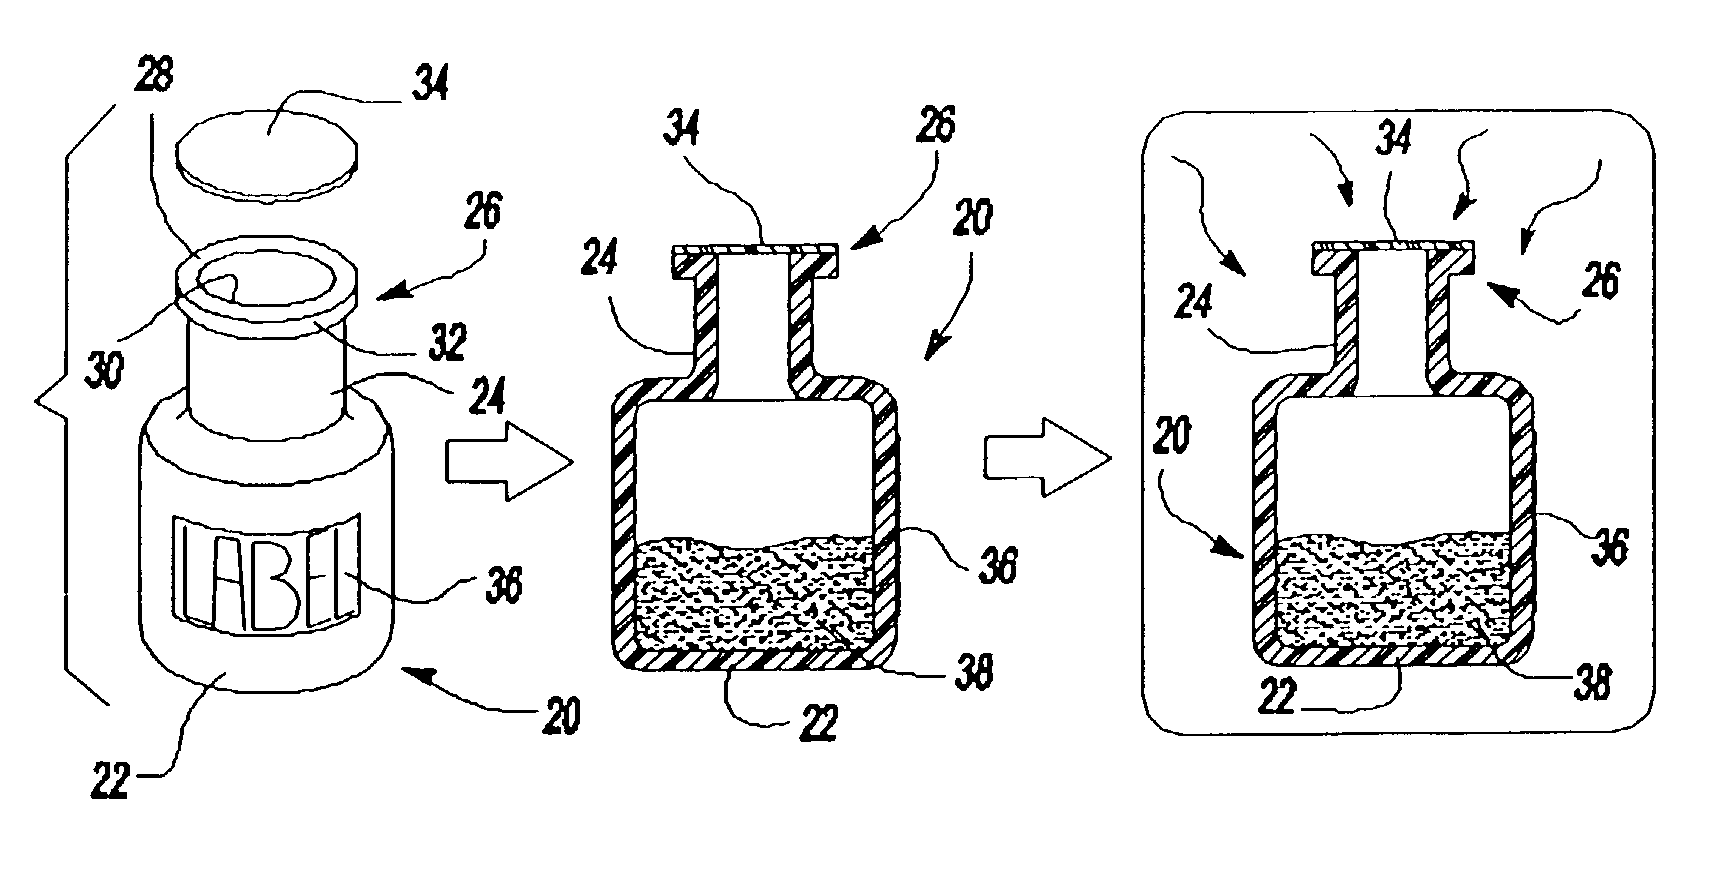 Method of fusing a component to a medical storage of transfer device and container assembly